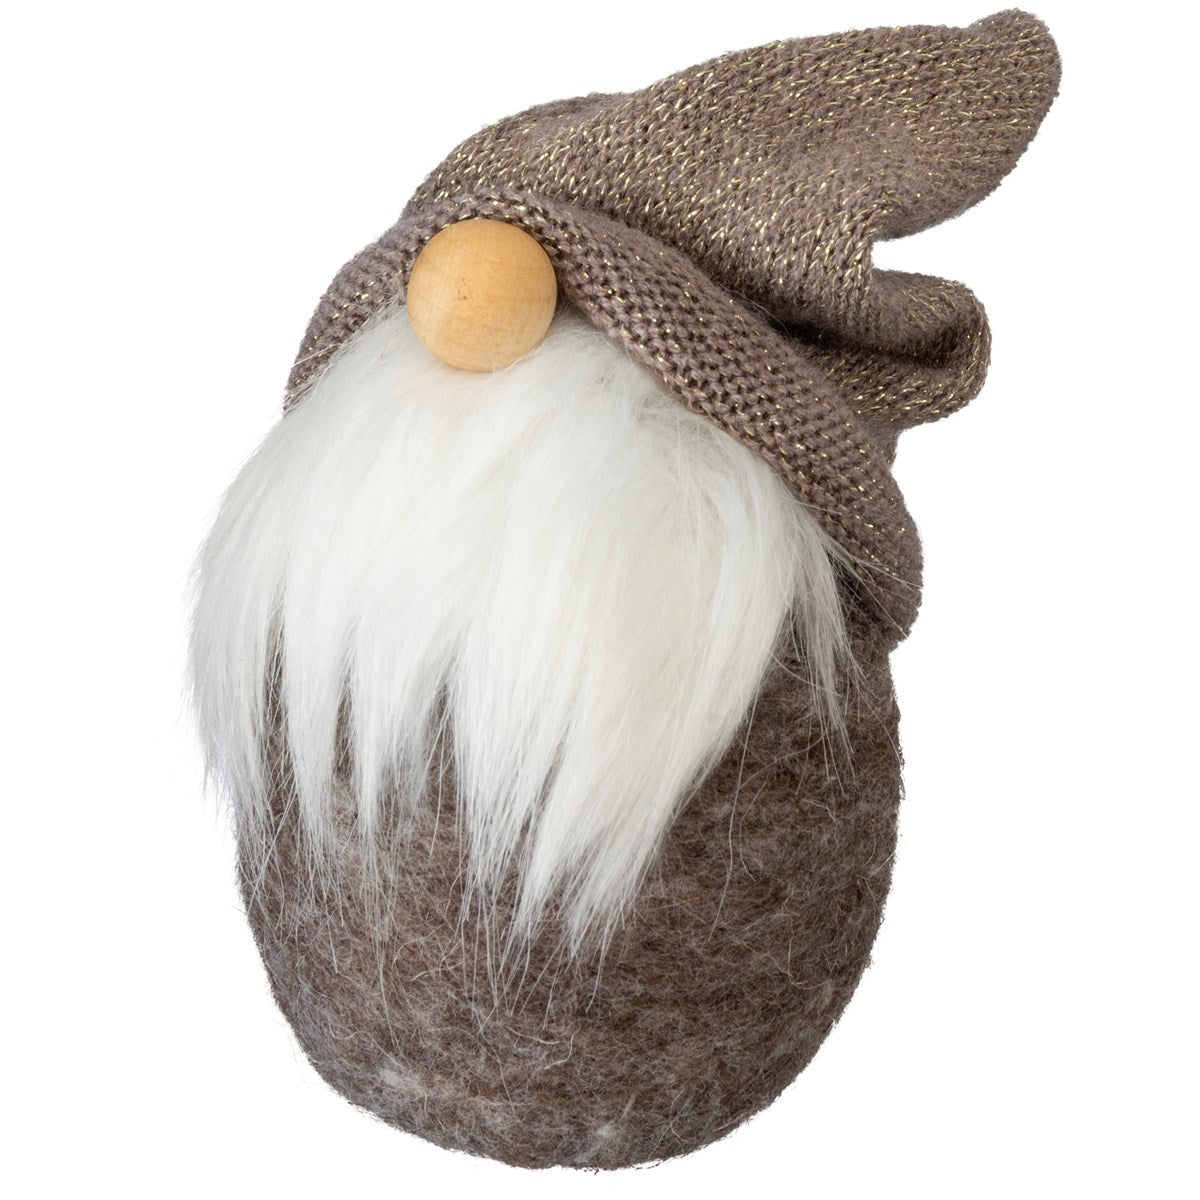 Lil' Brown Knit Cap Gnome